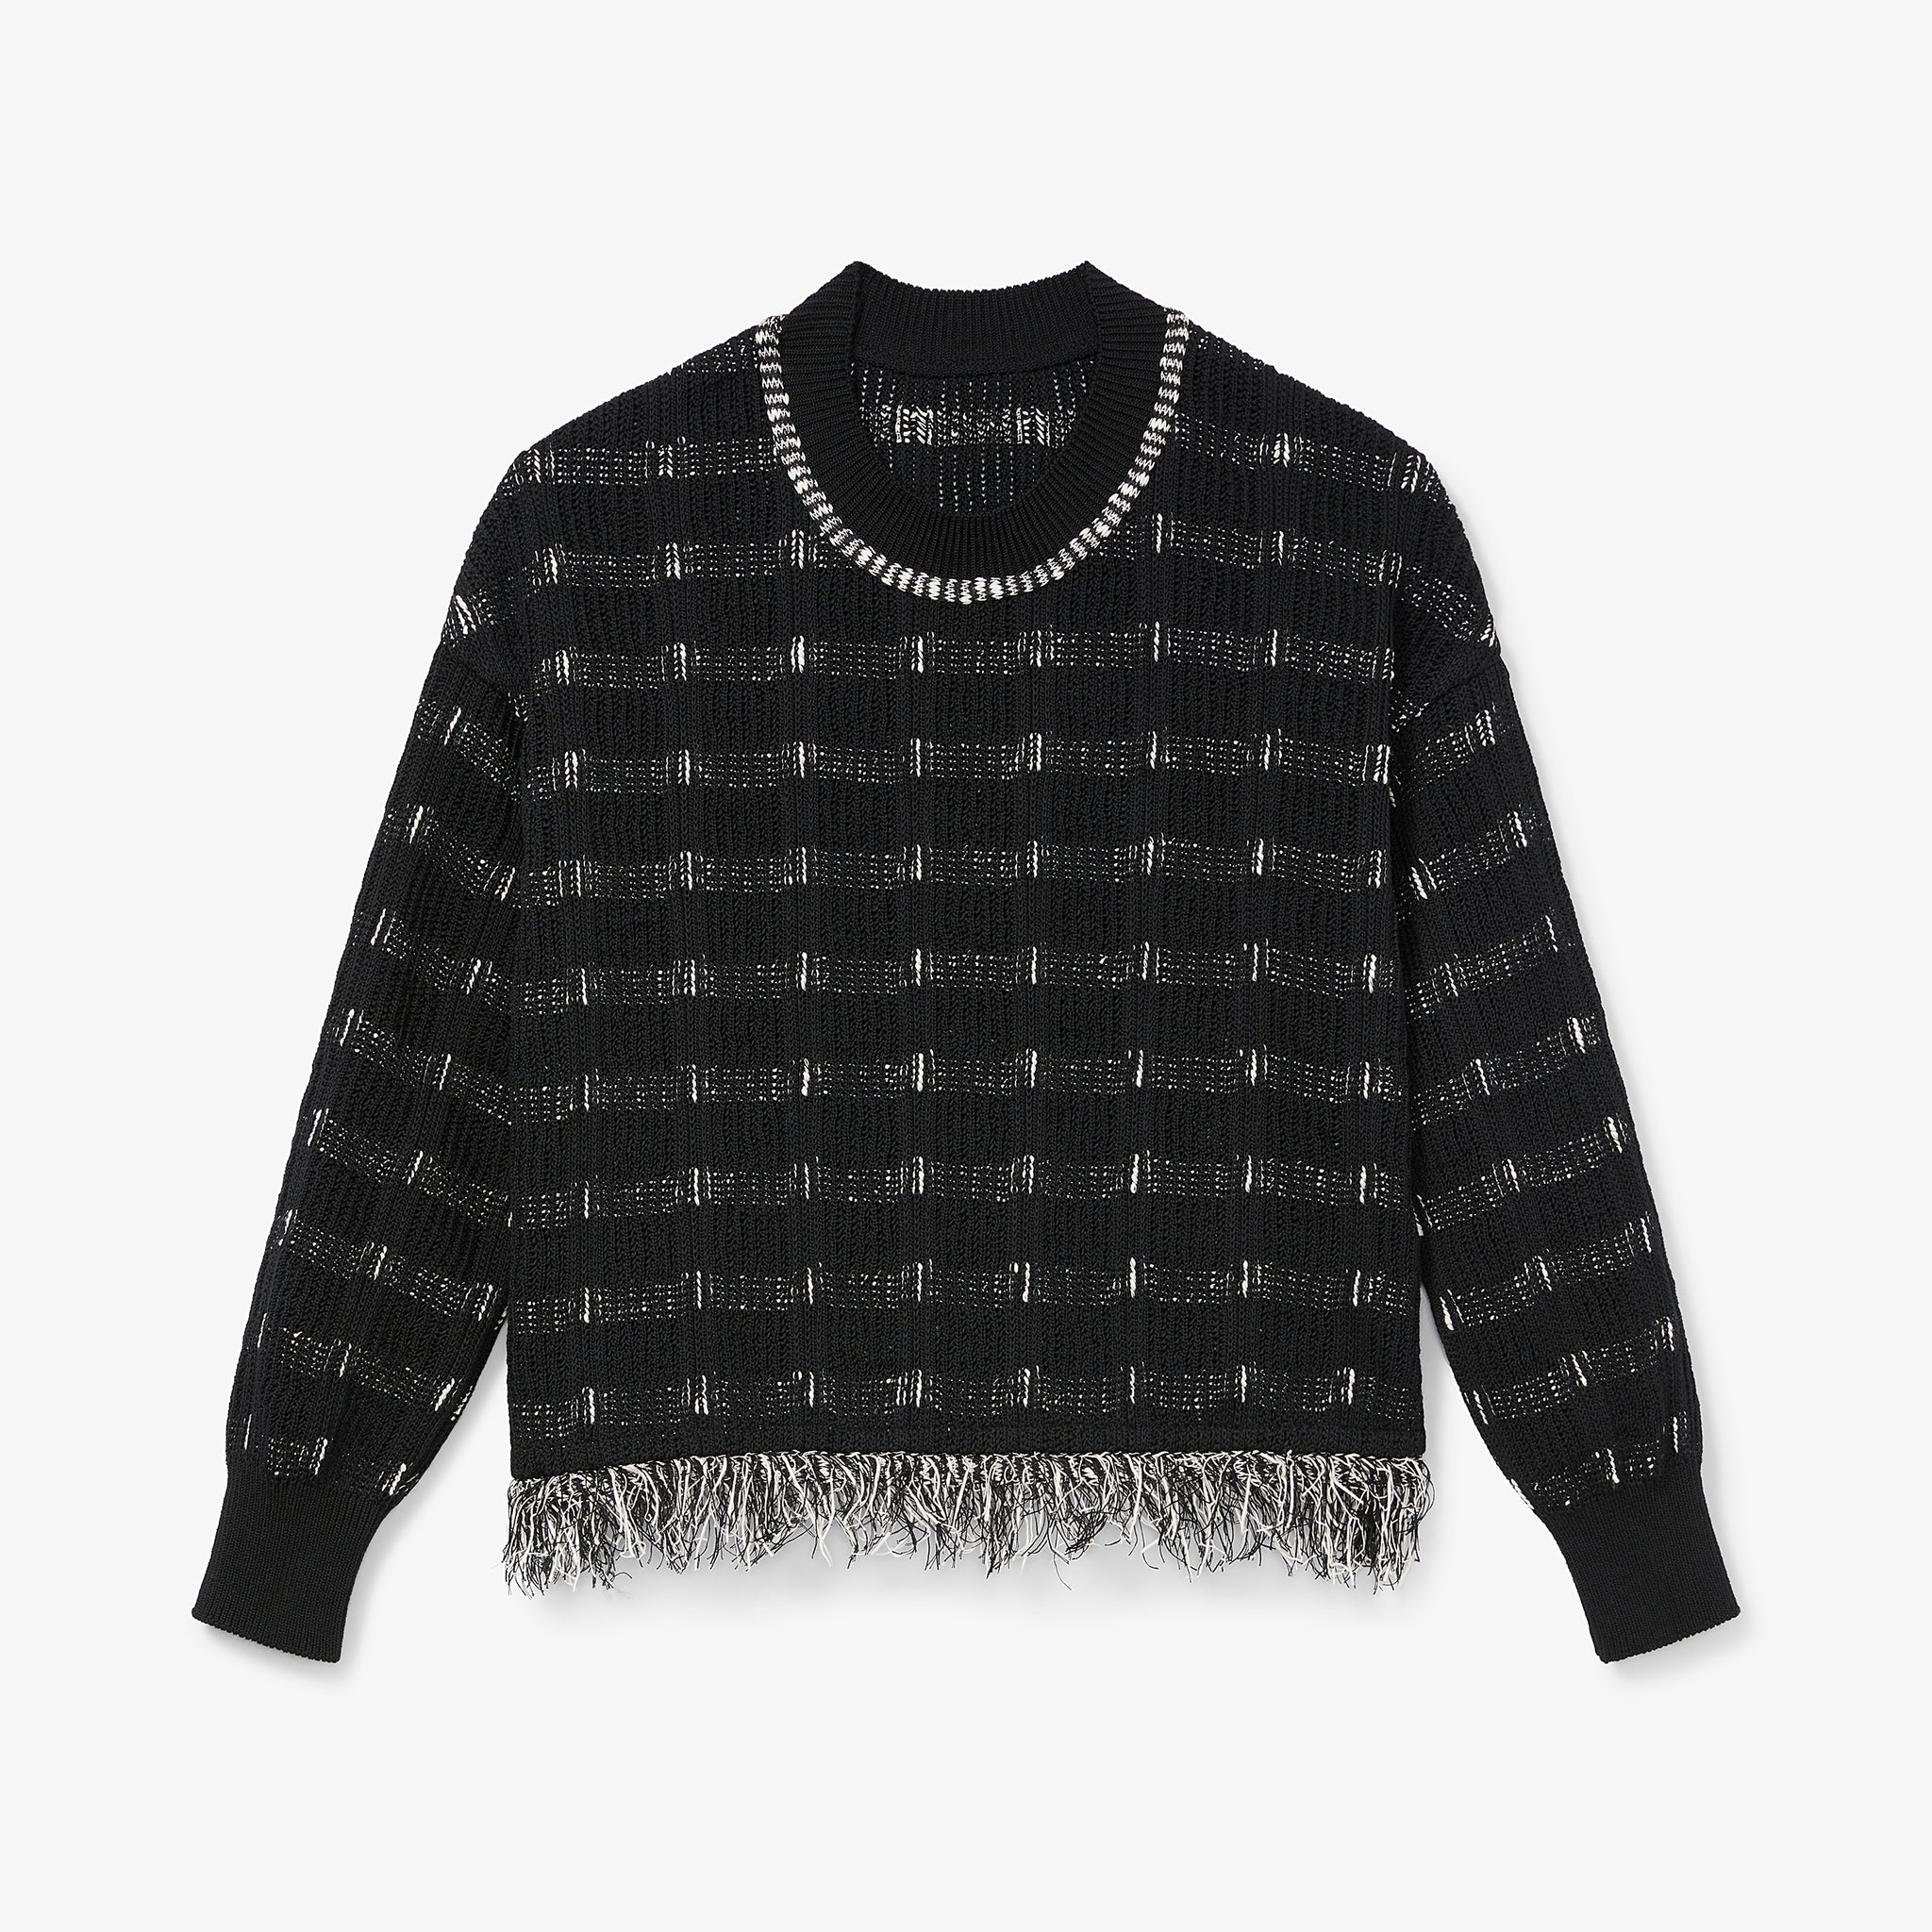 Packshot image of the Figari Pullover - Linear Interweave in Black / White